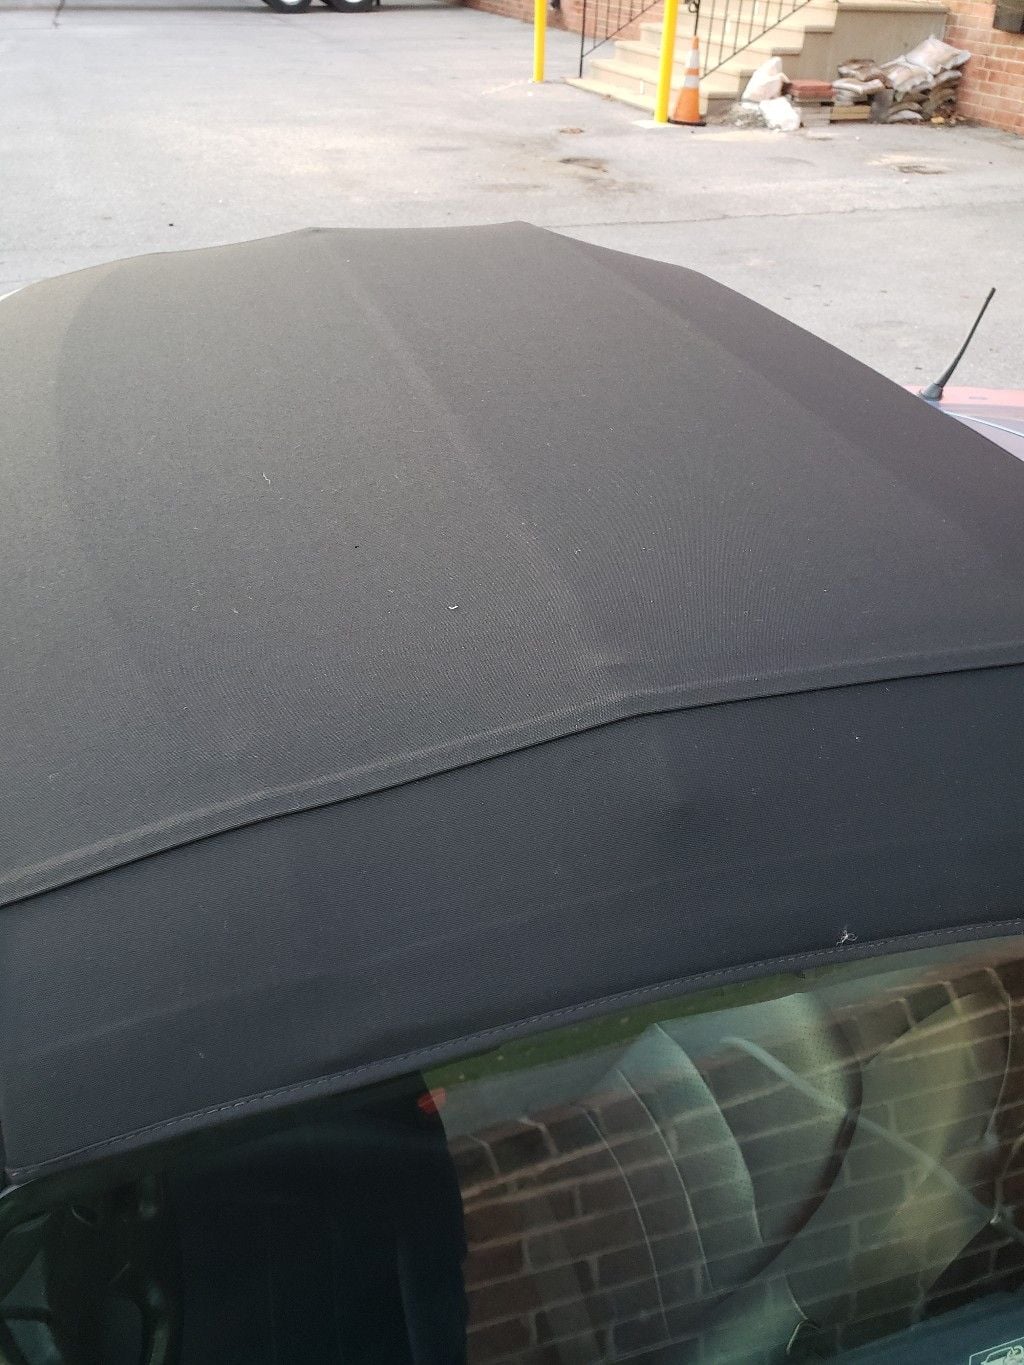 Replacement Convertible Topping Material - Vinyl vs Cloth